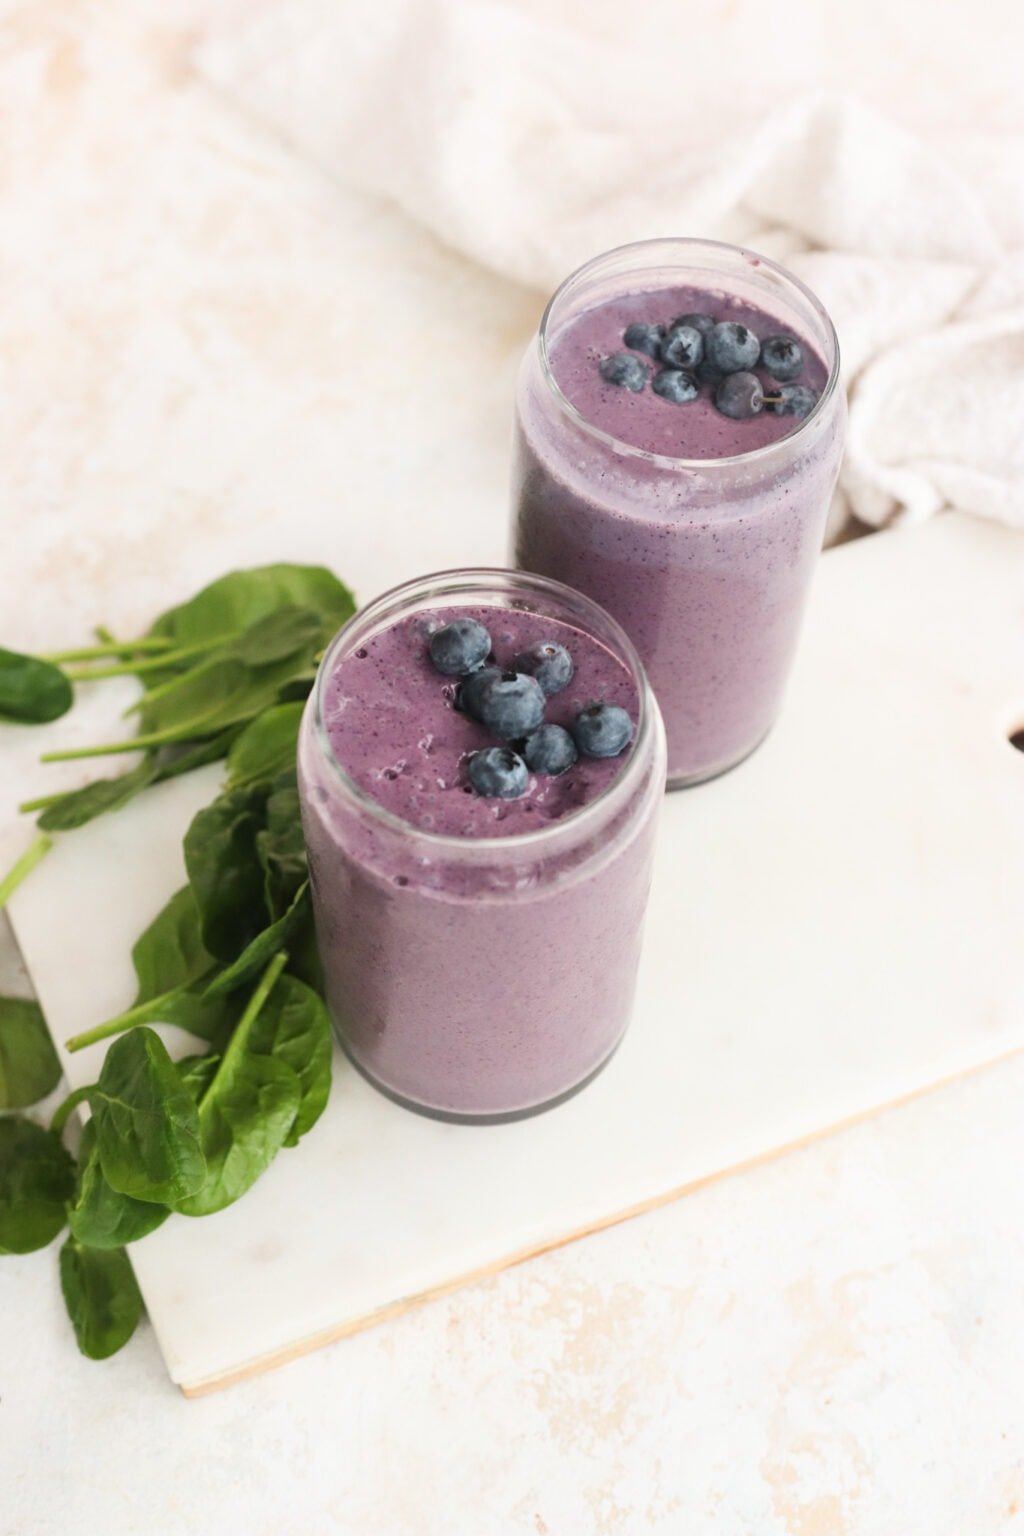 Two clear glasses filled with High Protein Blueberry Breakfast Smoothie with Cottage Cheese on a cutting board with spinach on the side